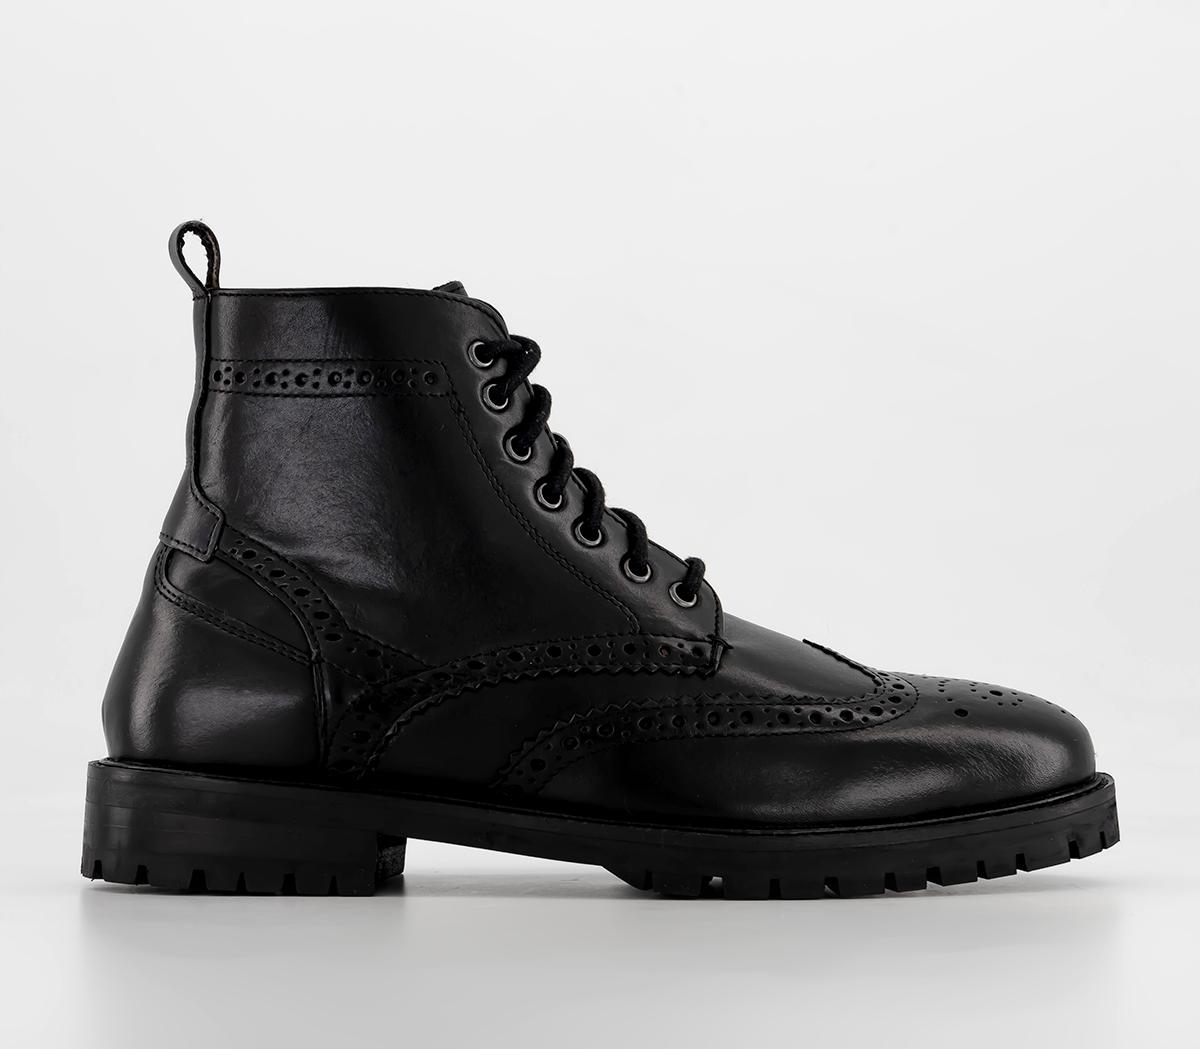 OFFICE Benson Brogue Wedge Lace Boots Black Leather - Men’s Boots